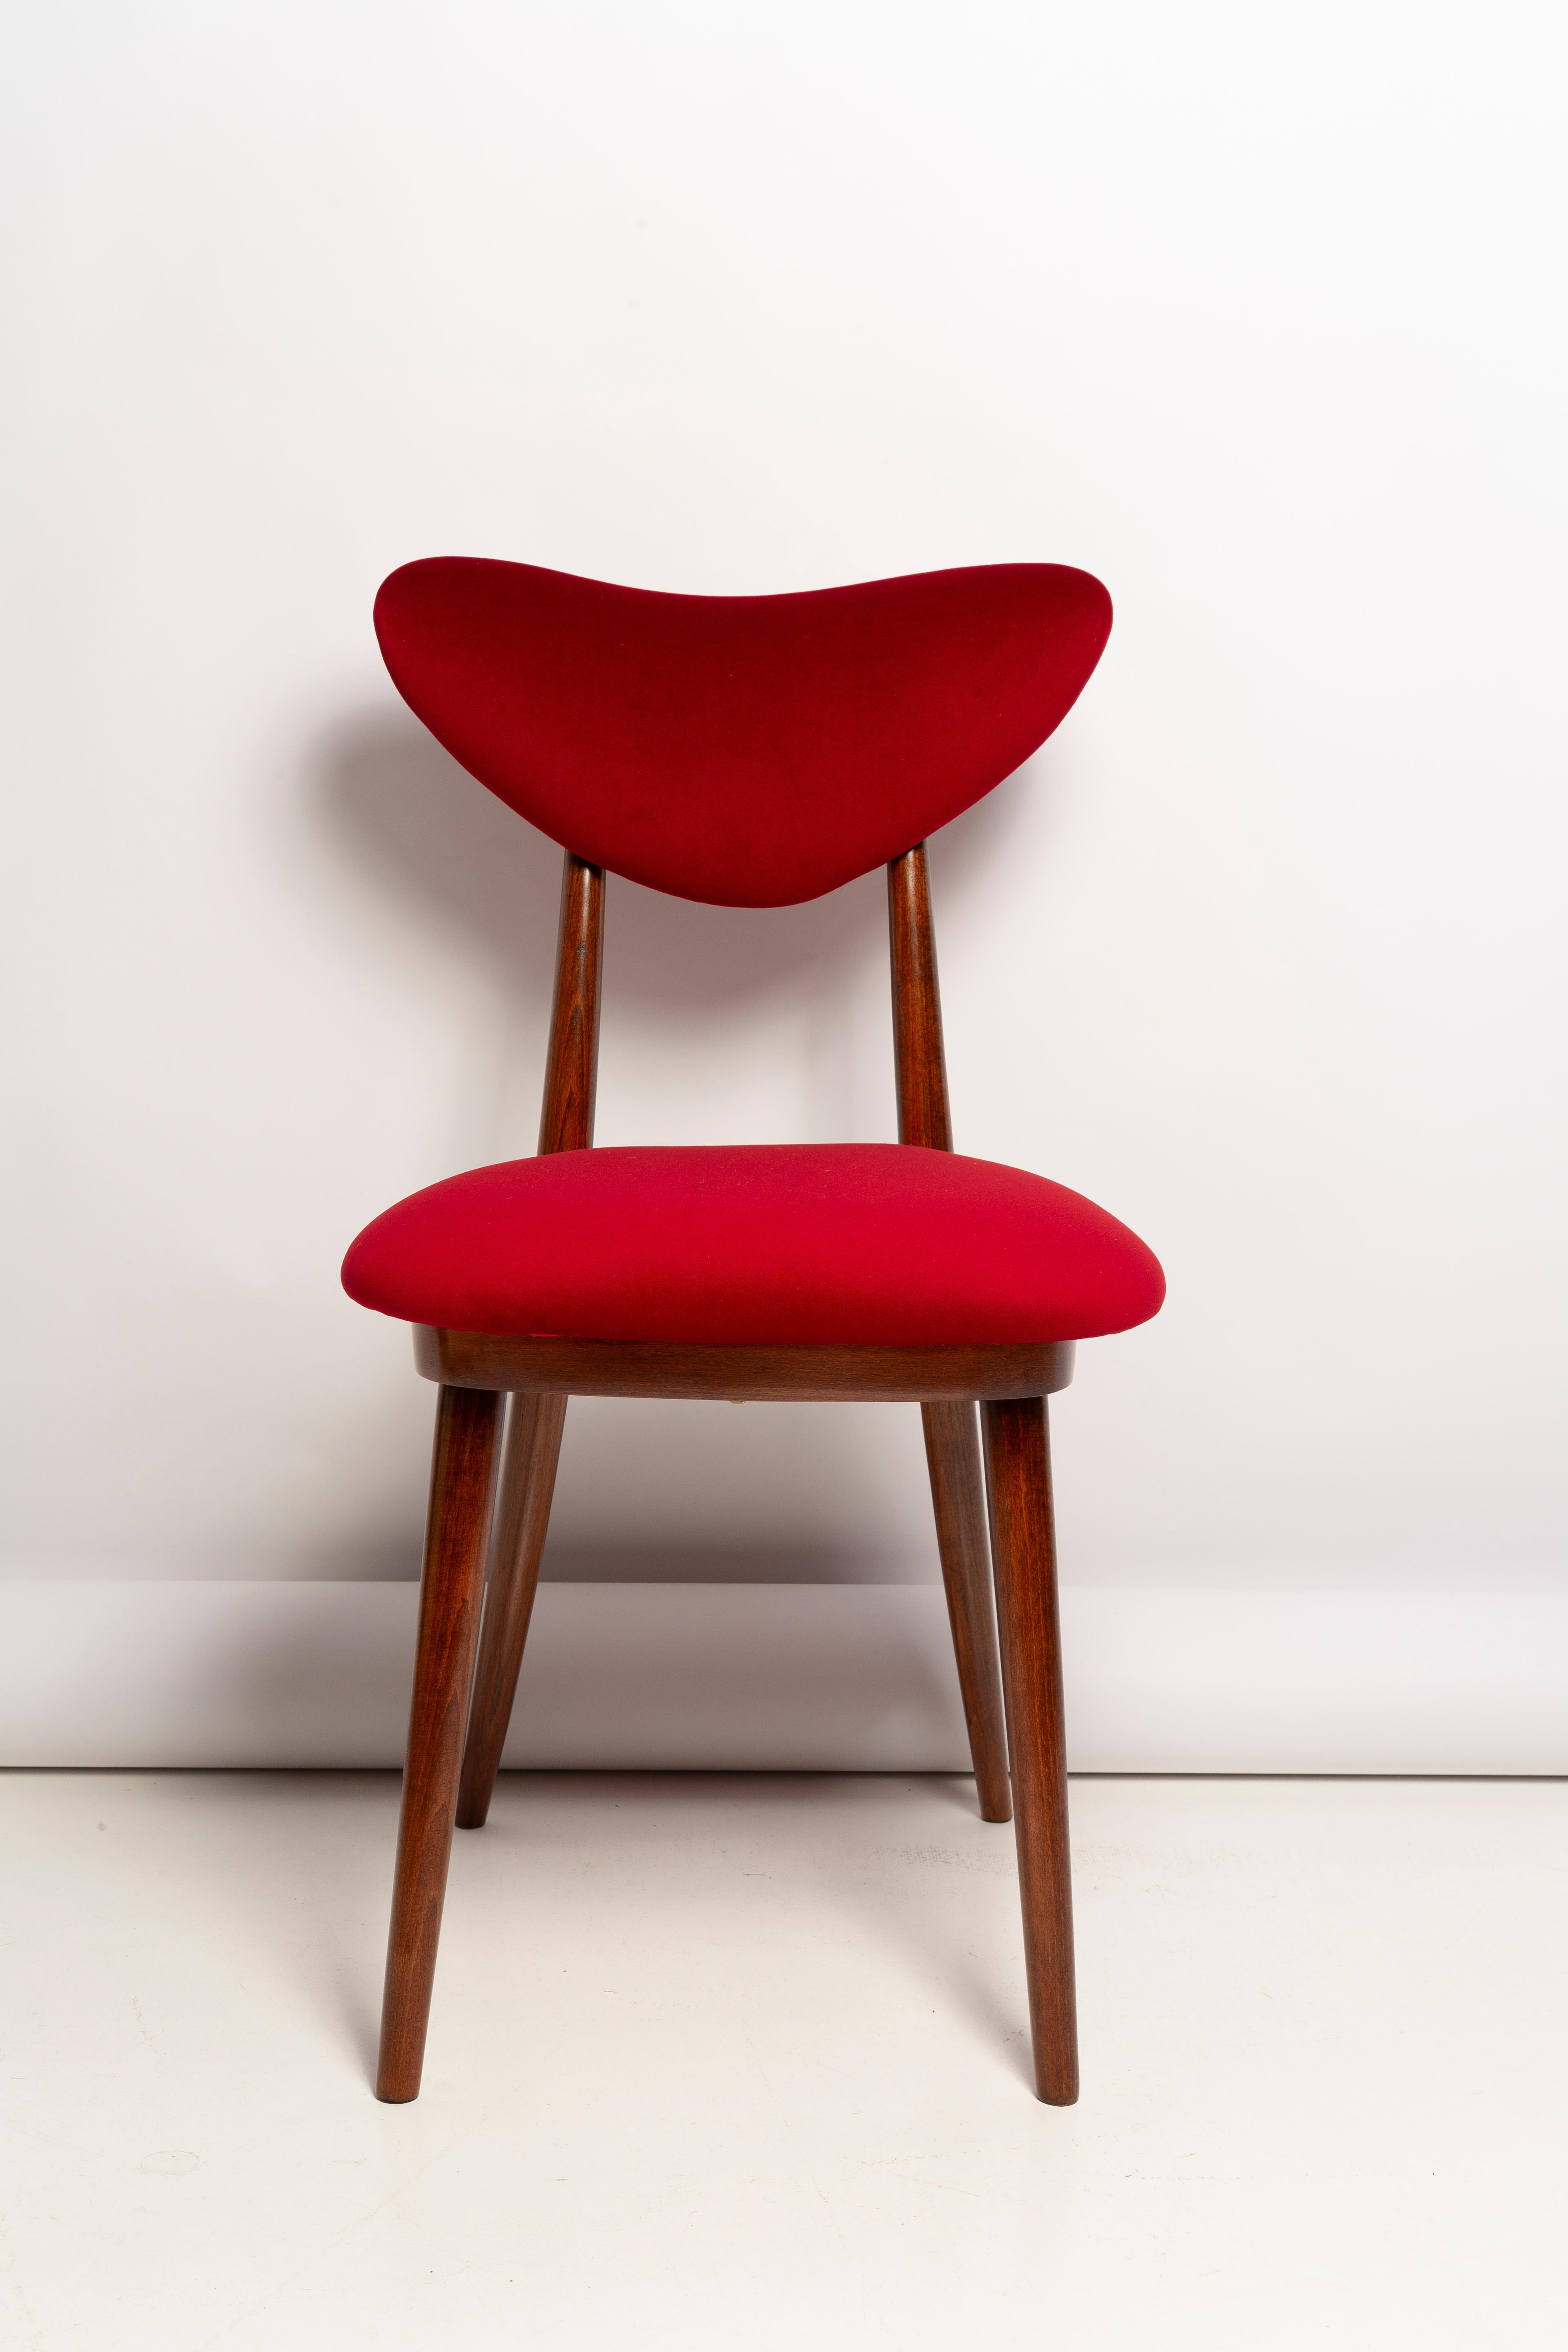 Set of Twelve Mid Century Red Heart Chairs, Poland, 1960s For Sale 6